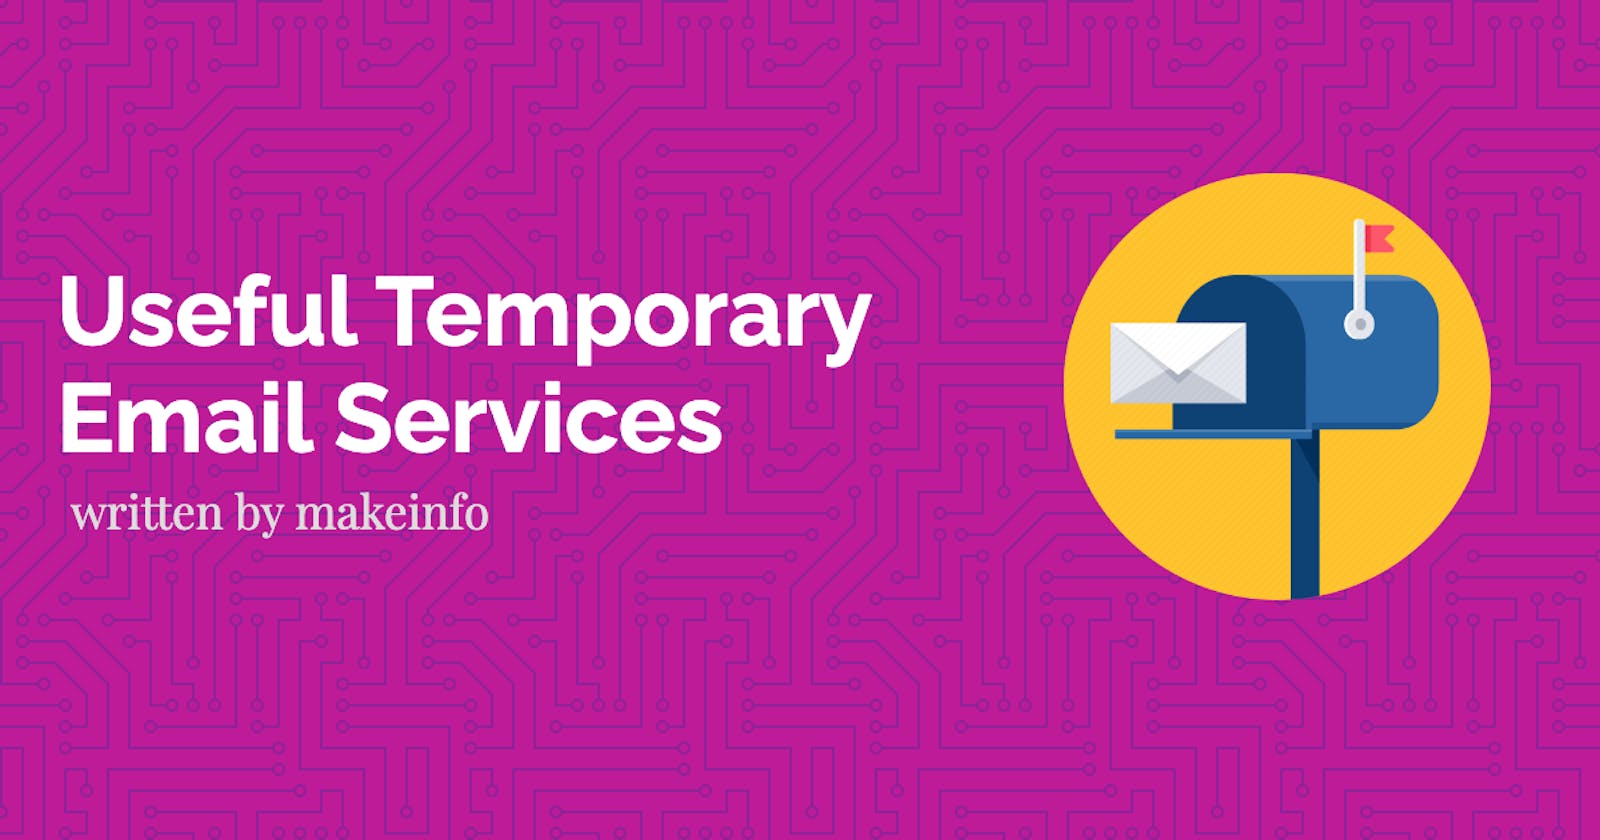 Useful Temporary Email Services for Verfication and Testing